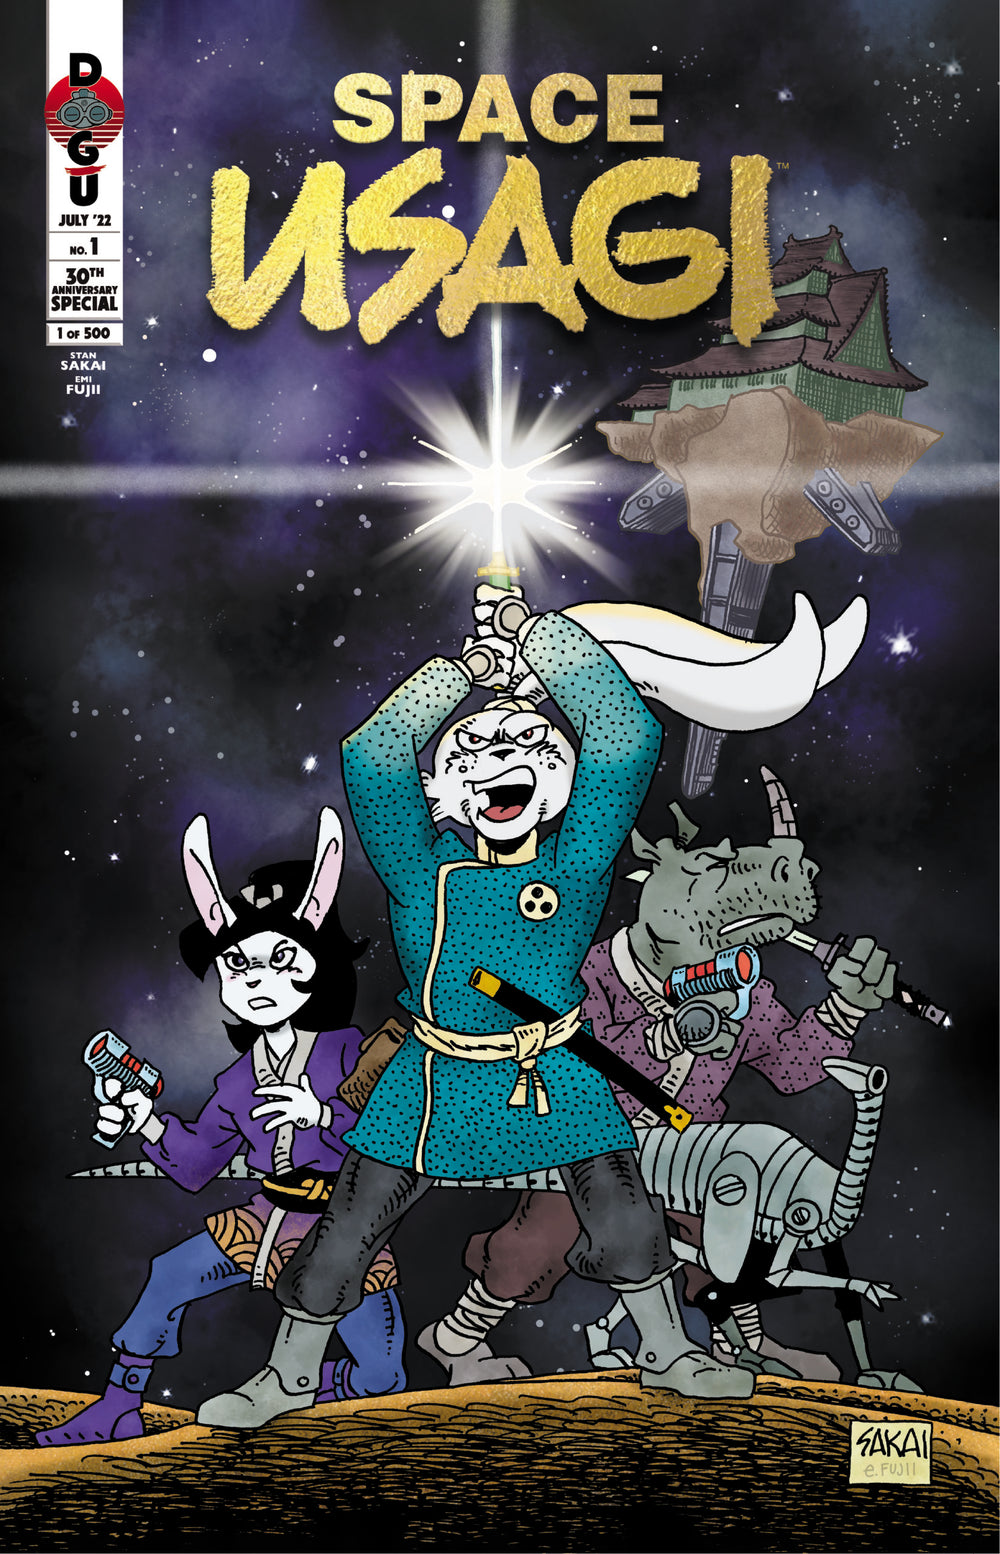 SDCC 2022 SPACE USAGI #1 Stan Sakai GOLD FOIL Star Wars Homage Exclusive! (Ltd to Only 500) ***Only 3 Copies Available!***